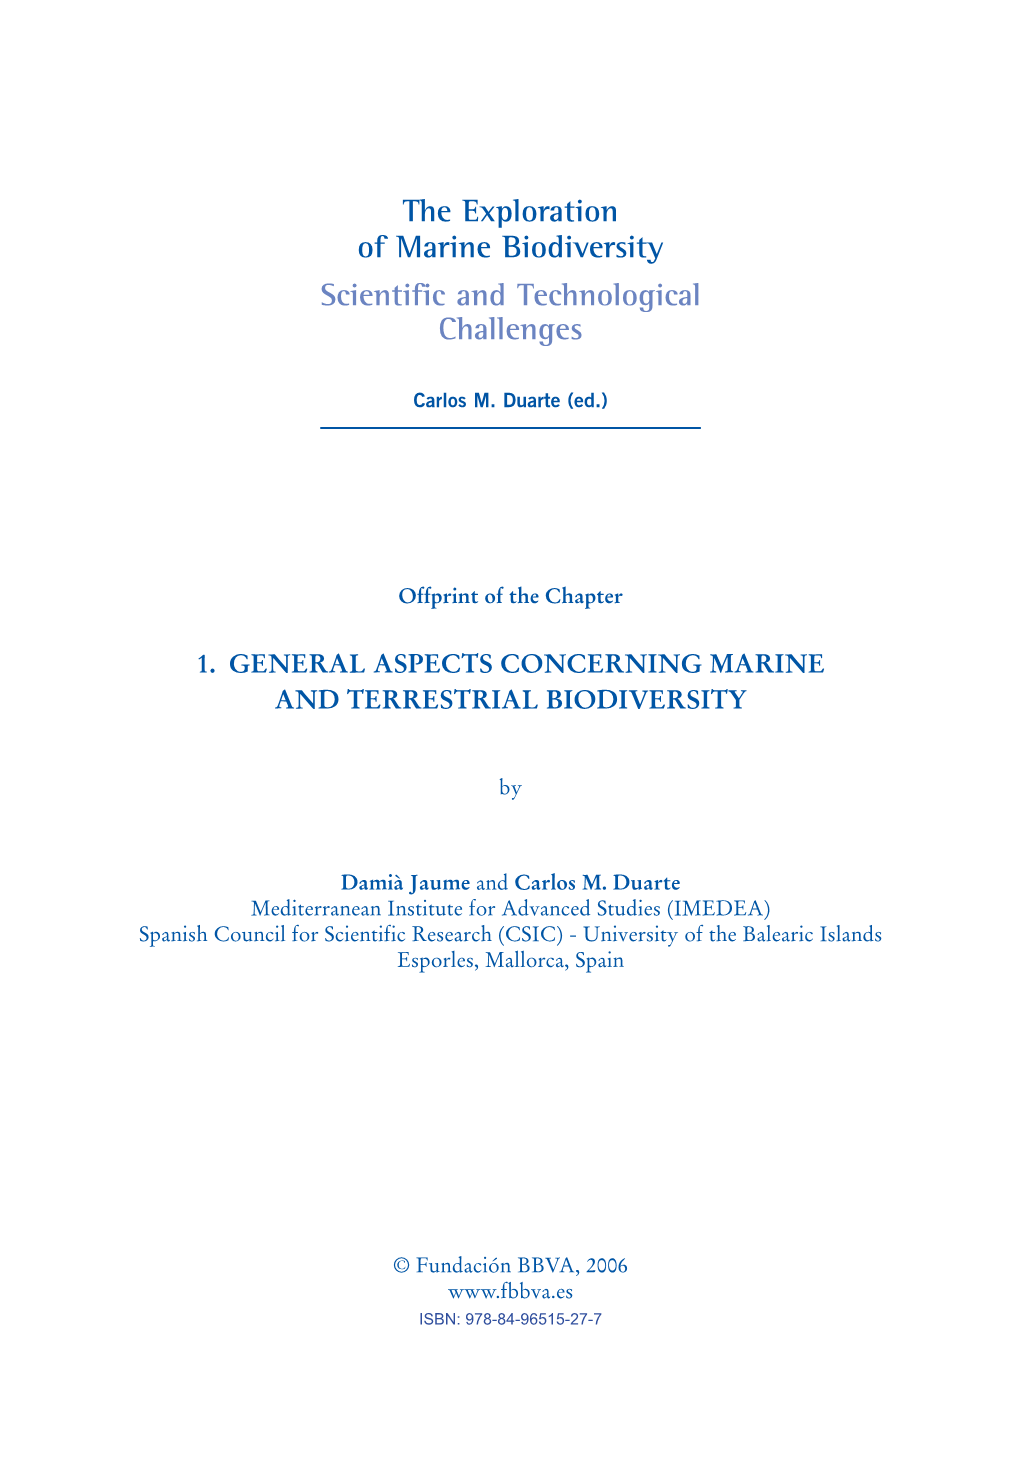 General Aspects Concerning Marine and Terrestrial Biodiversity